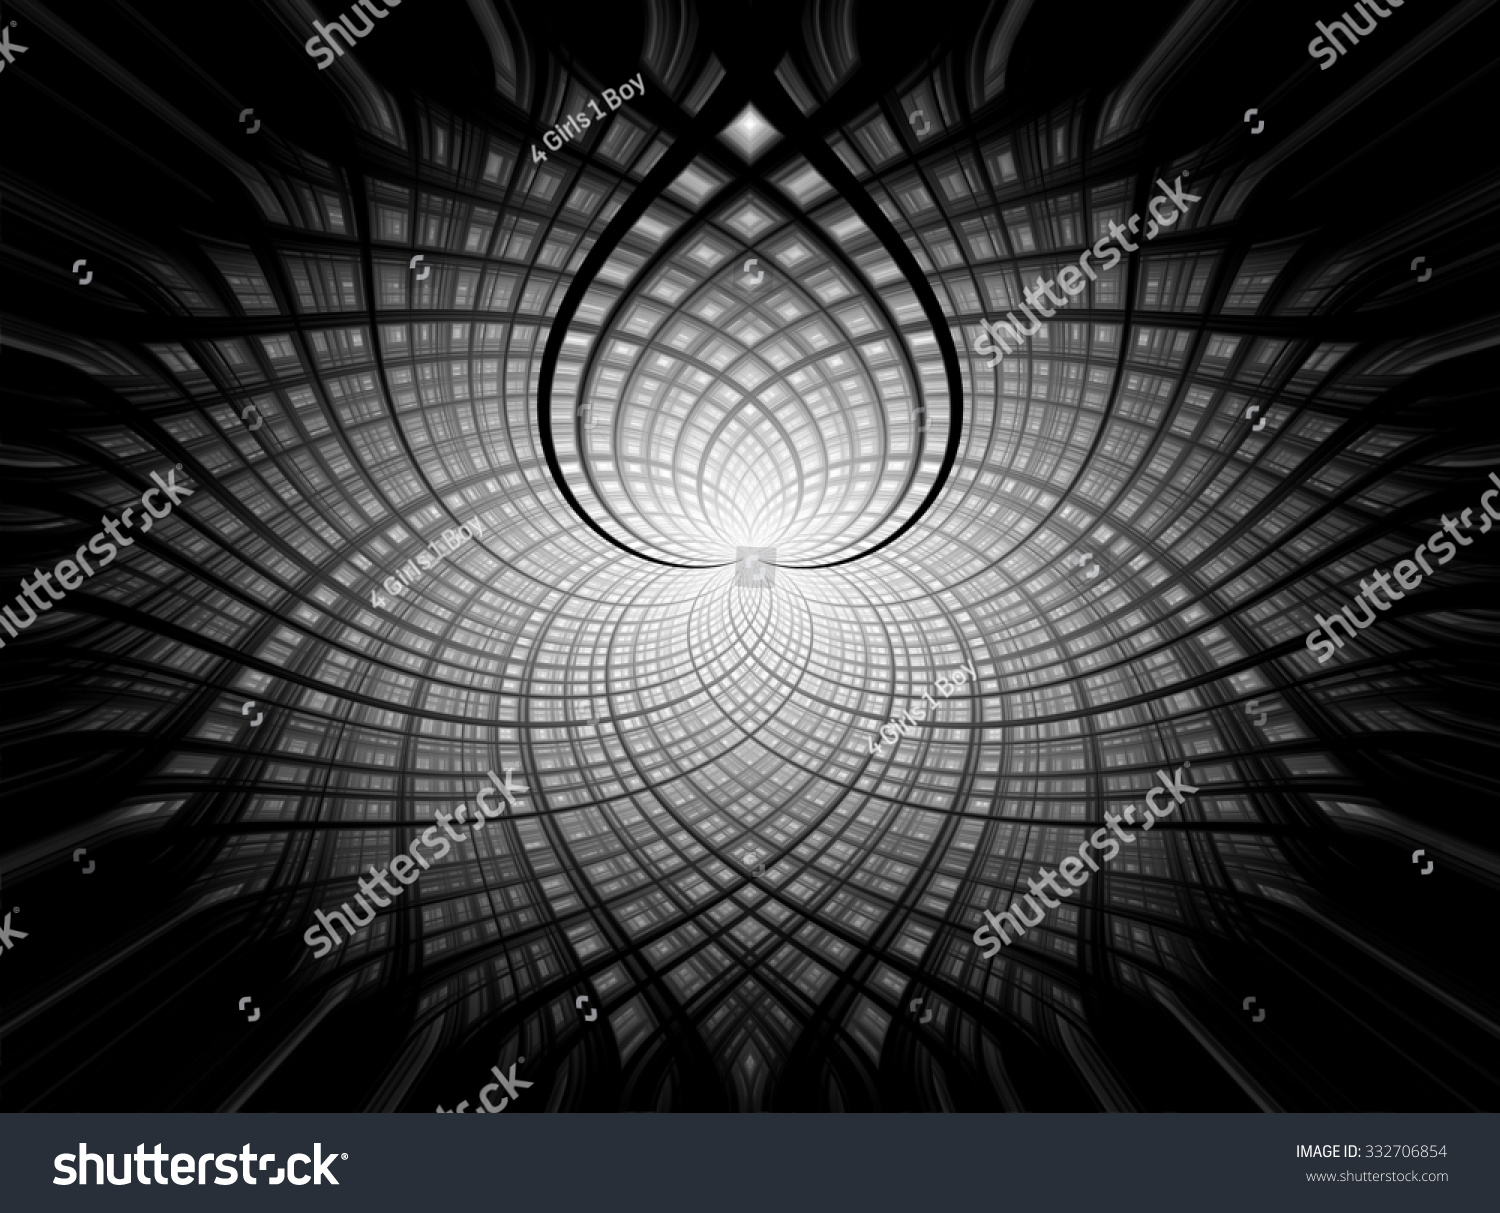 Edit Vectors Free Online - black and white | Shutterstock Editor